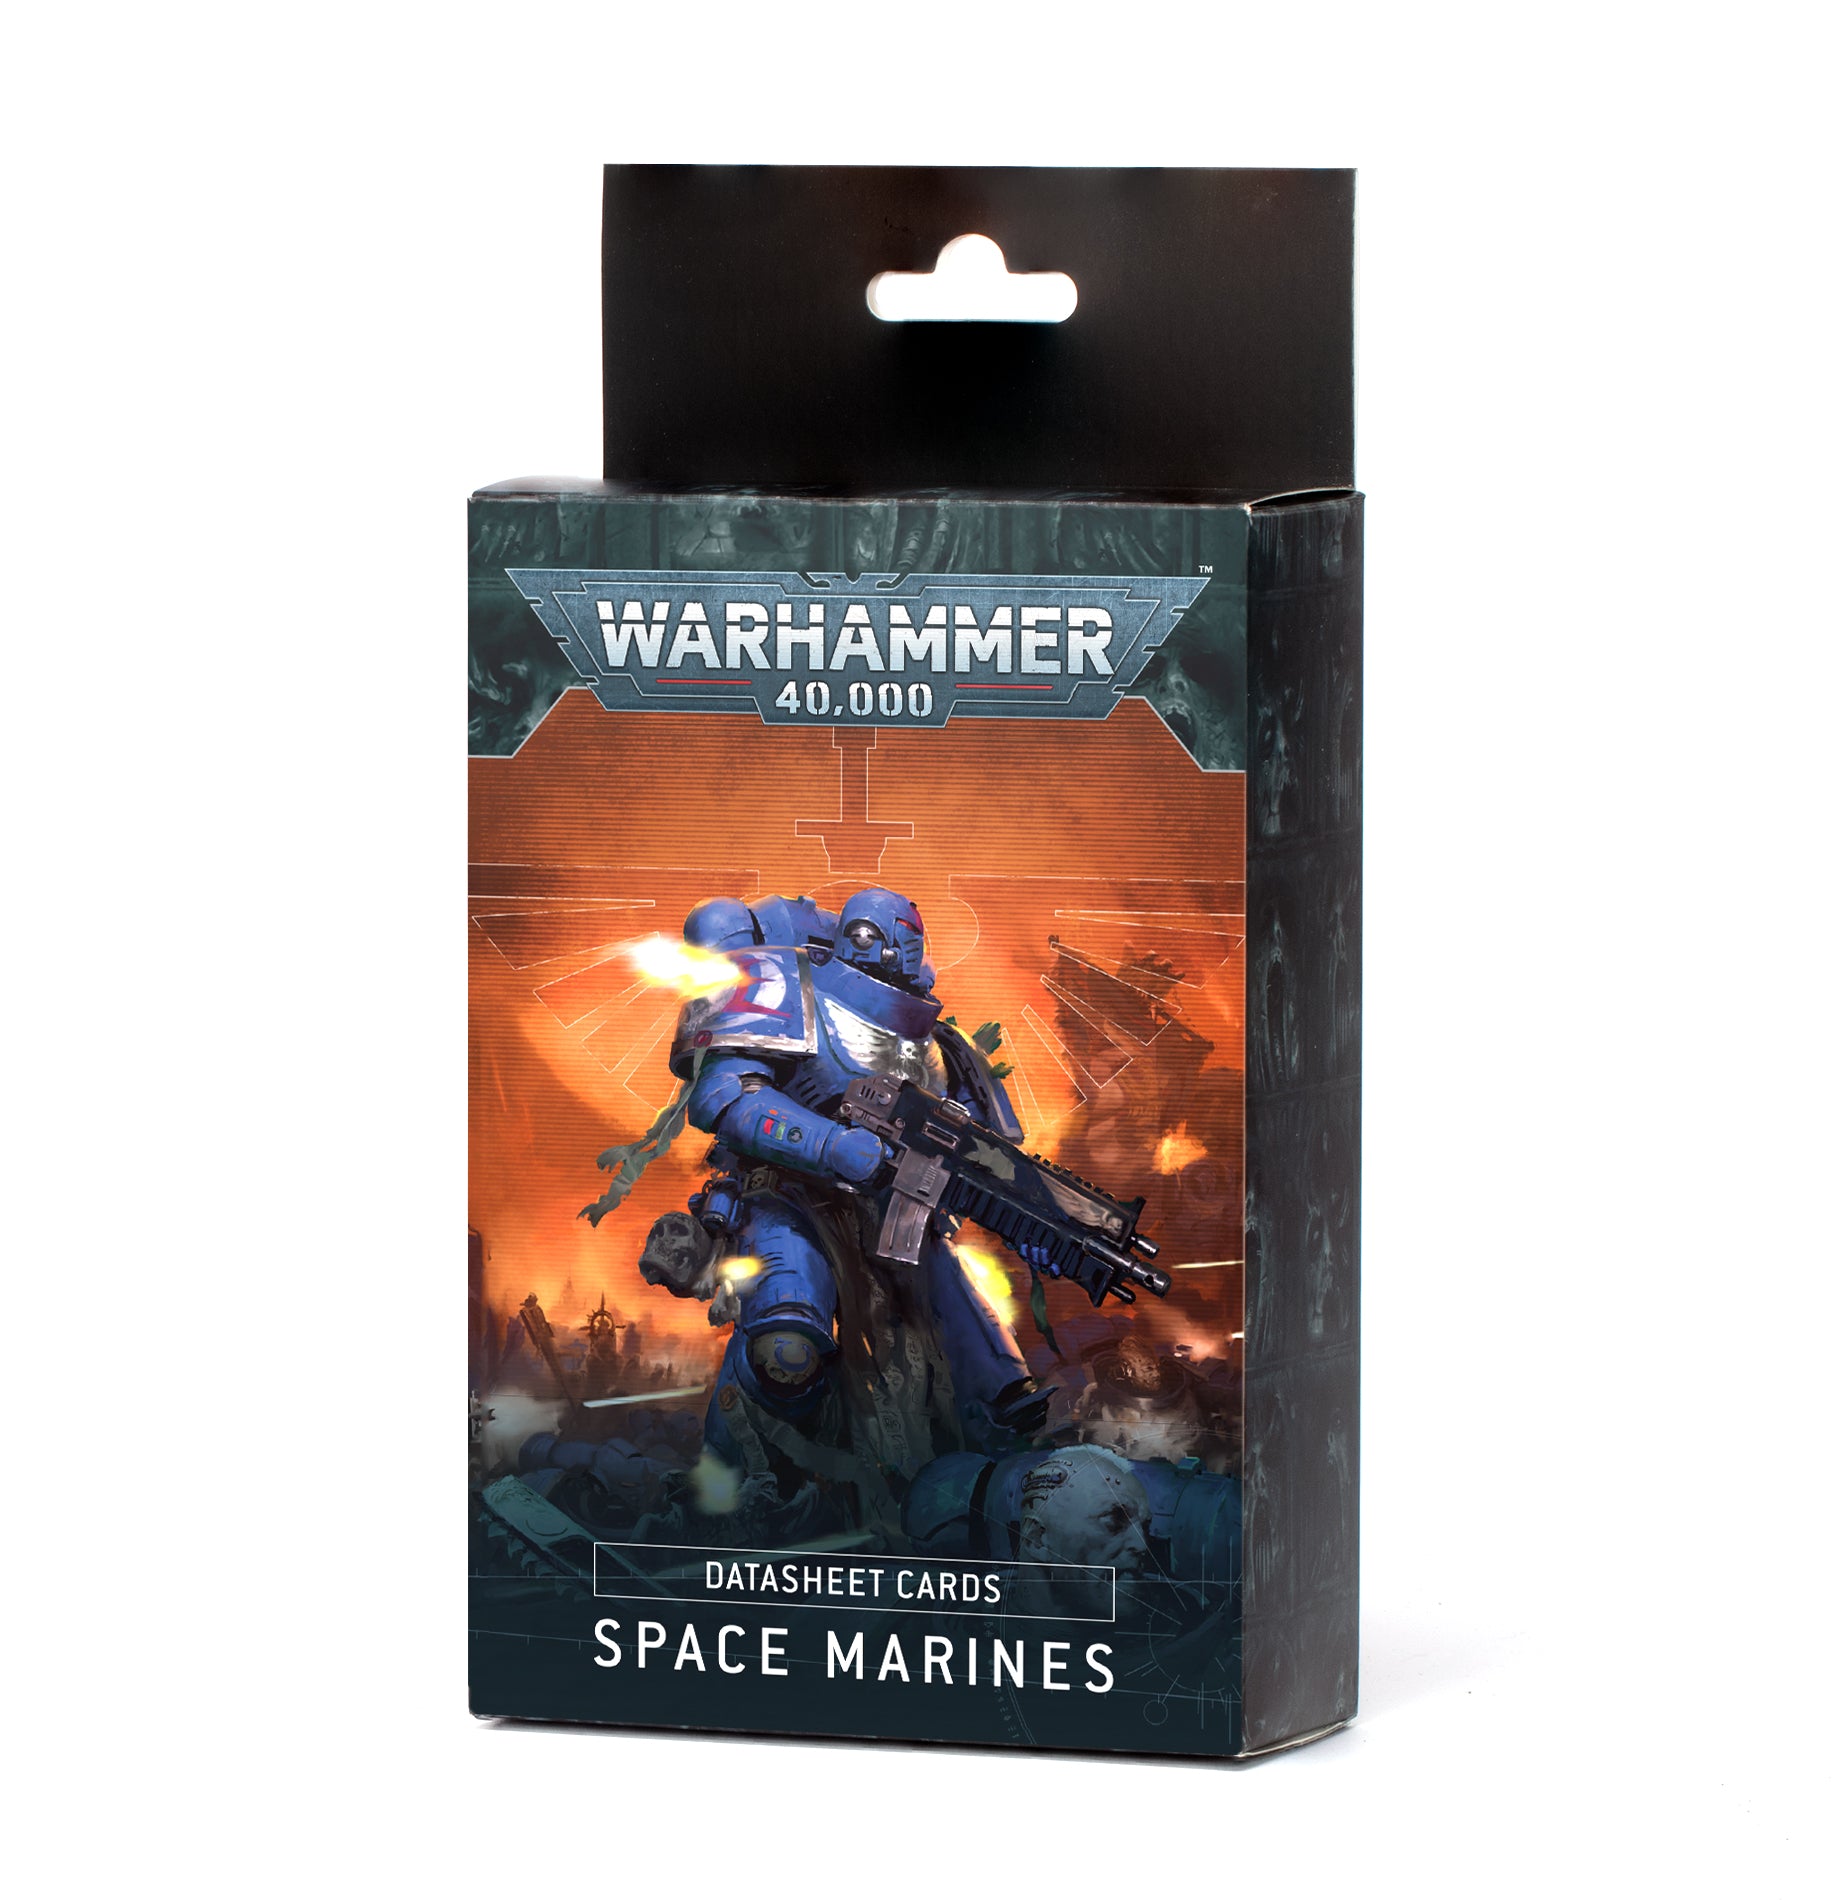 a box of space marines warhammerer